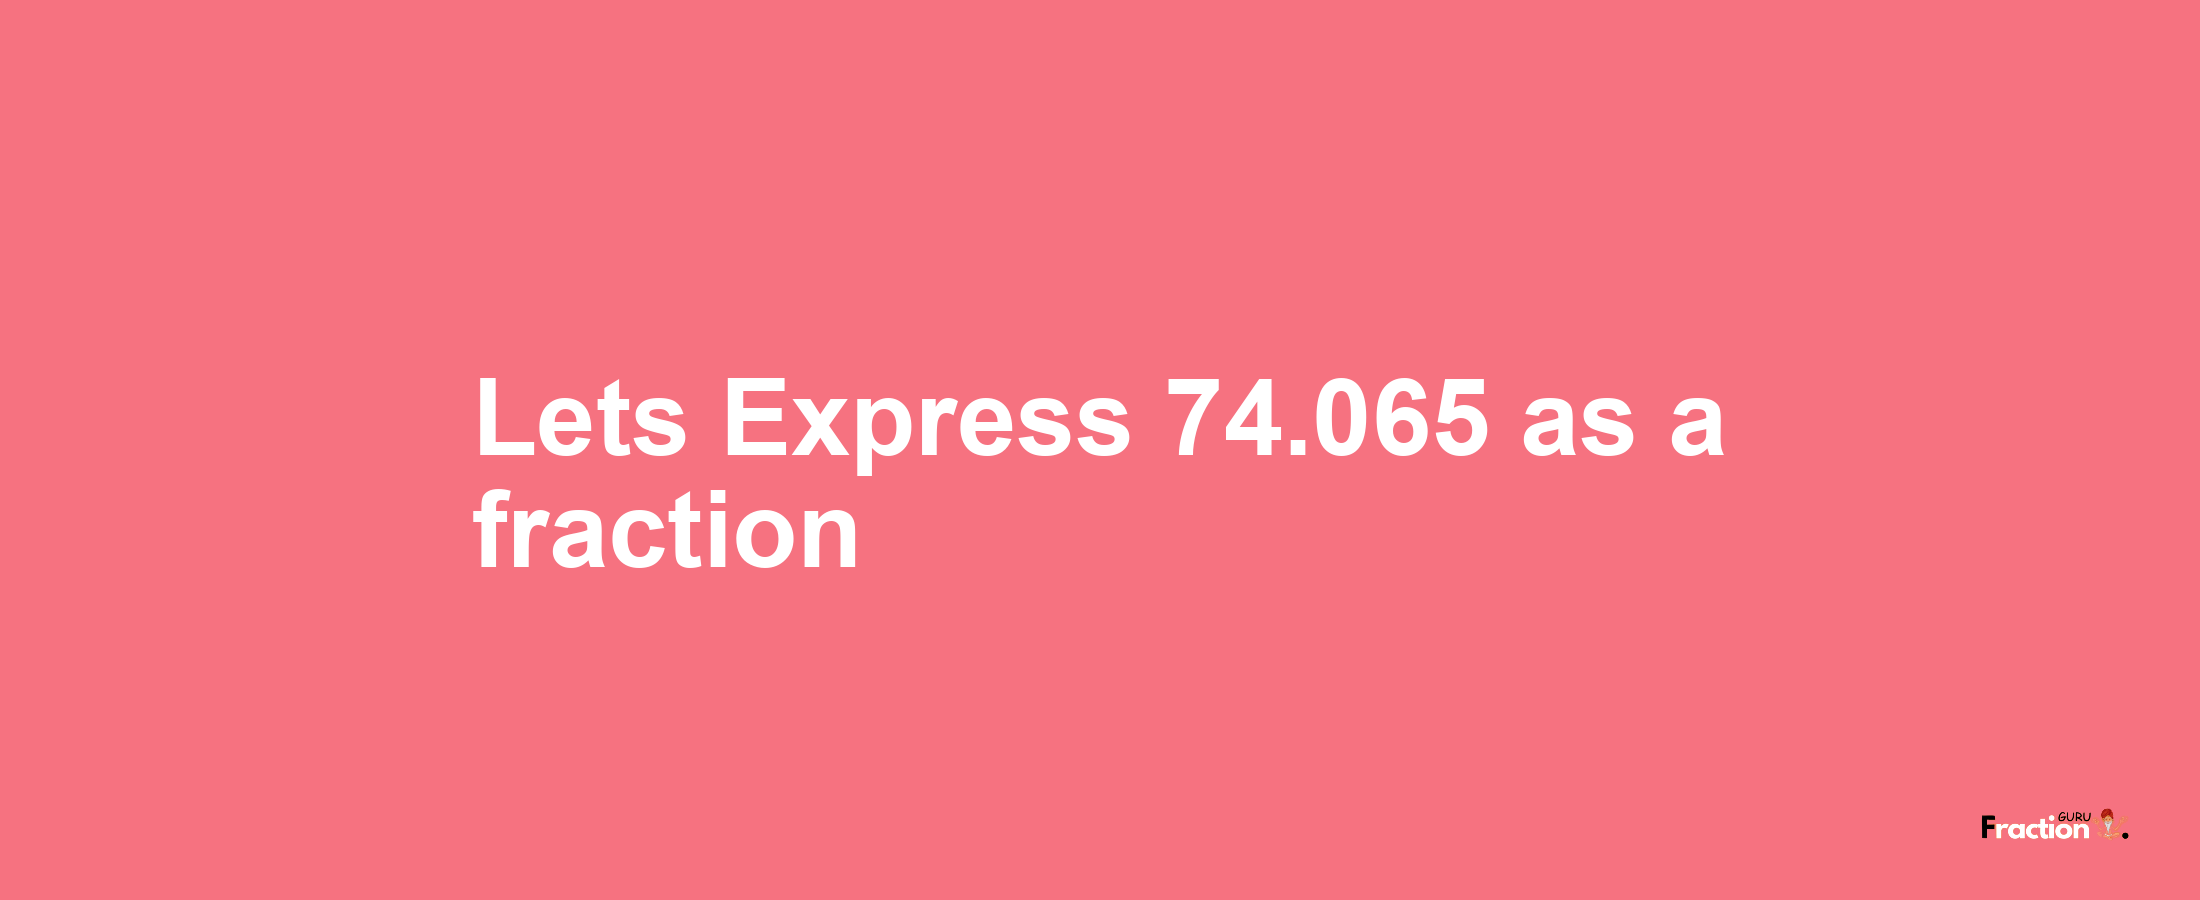 Lets Express 74.065 as afraction